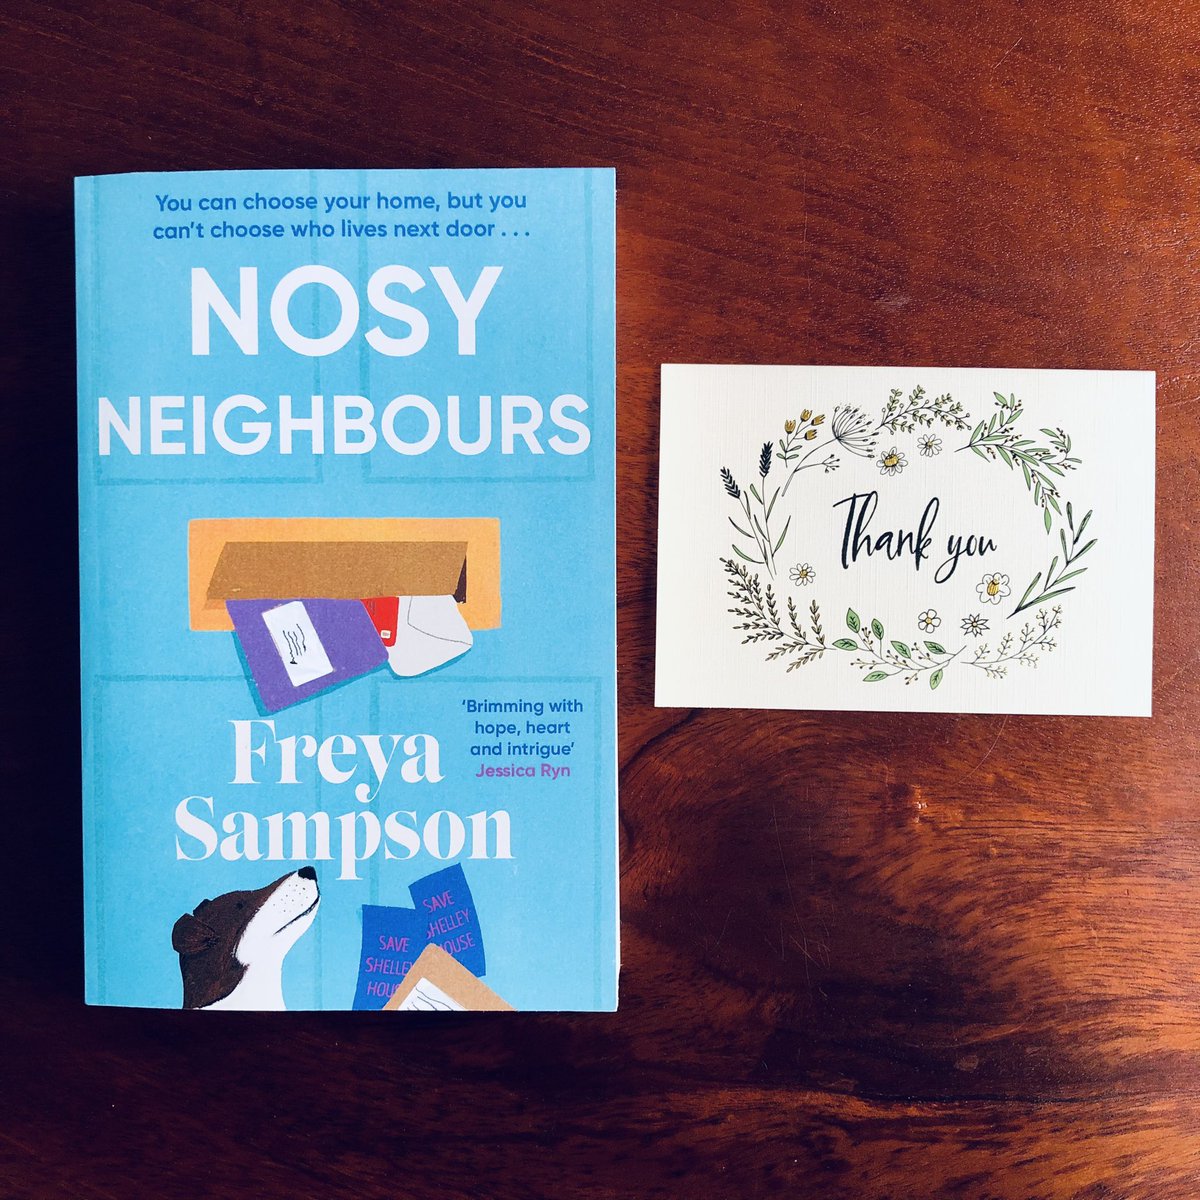 Thank you @SampsonF for a copy of #NosyNeighbours and the lovely note. I’ve loved all of Freya’s books as does my mum. I pass on my copies to mum and then we discuss the story 😊